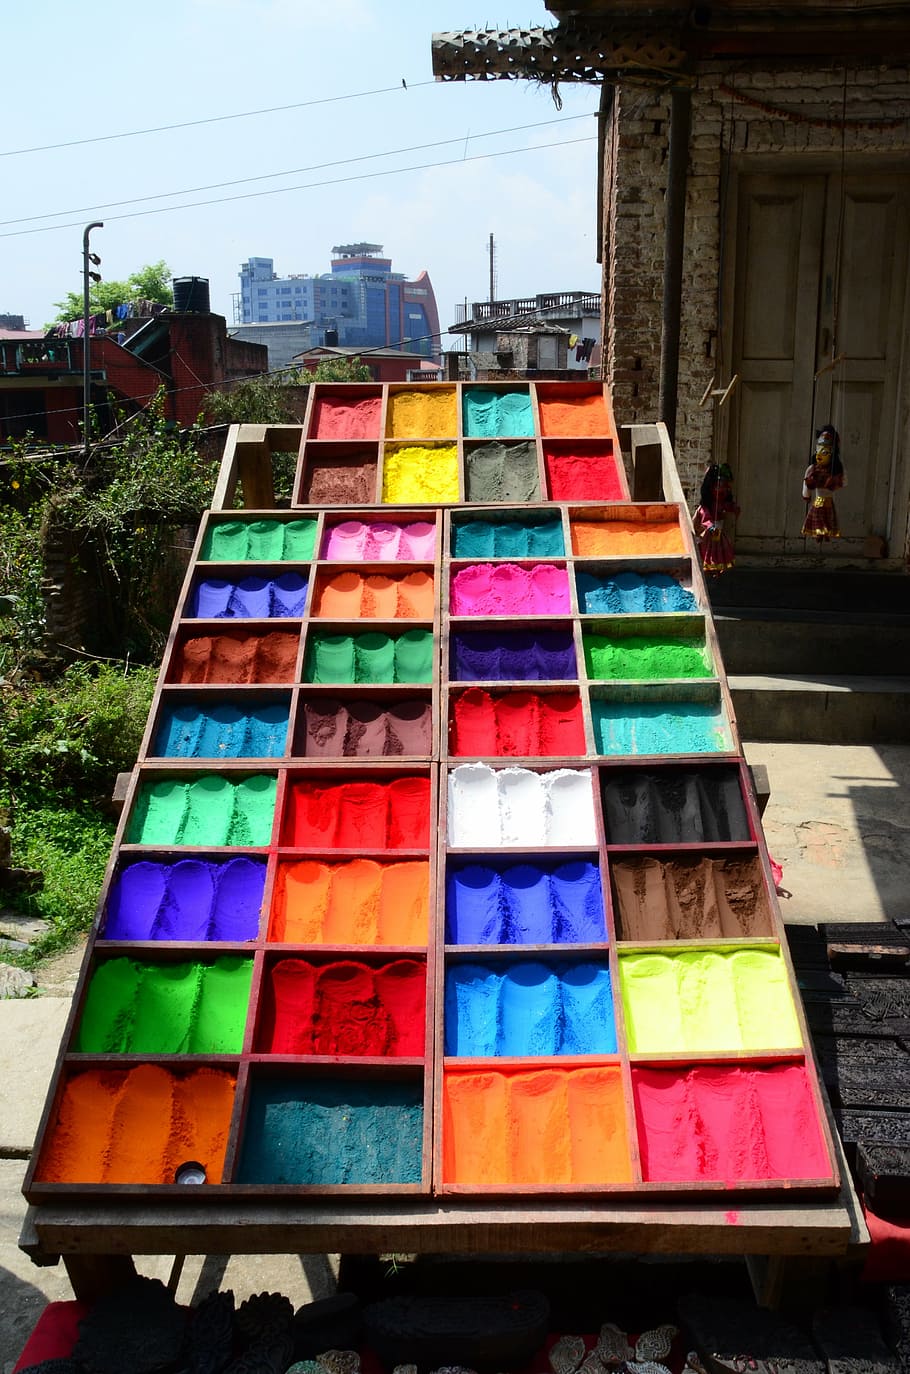 colors, pigments, festival, holly, nepal, multi colored, architecture, day, built structure, building exterior